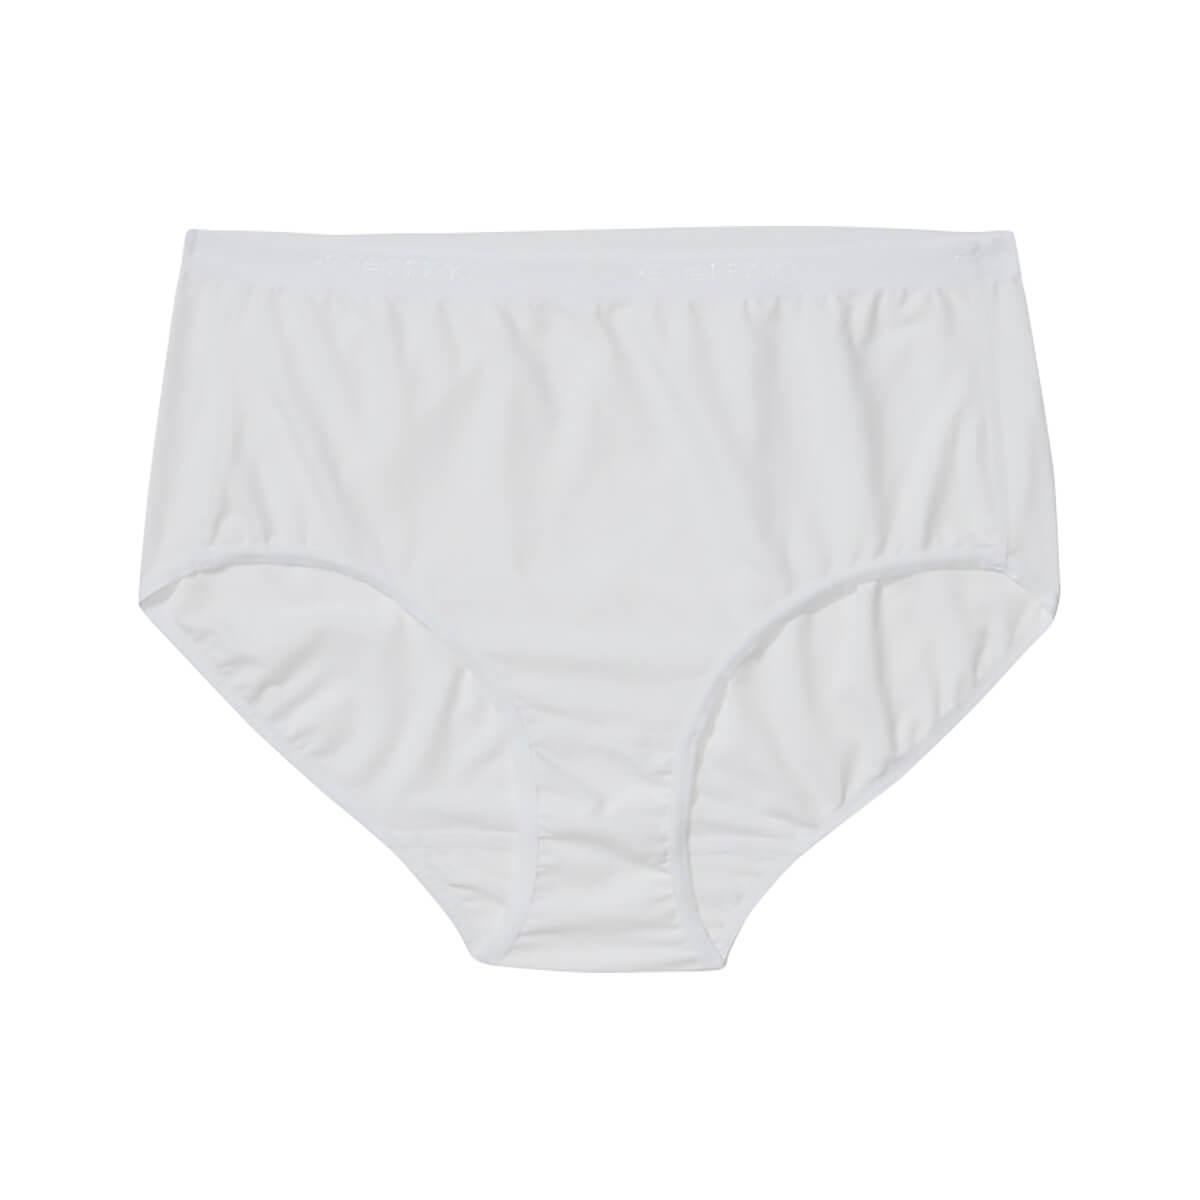  ExOfficio Men's Give-n-go 2.0 Brief - White - Large : Clothing,  Shoes & Jewelry